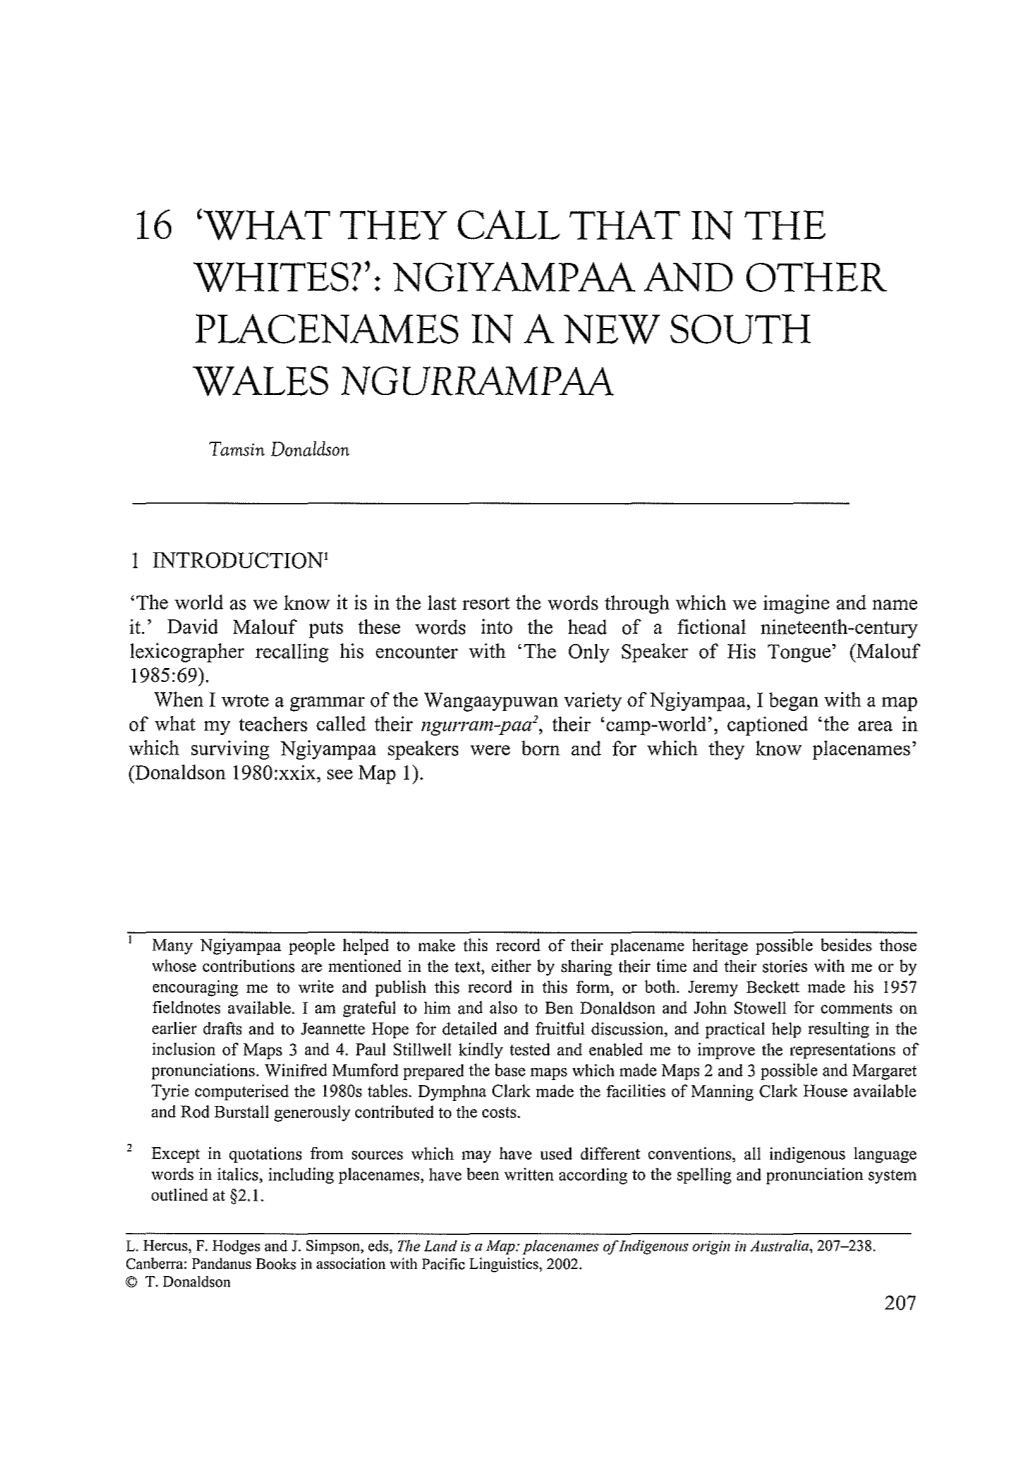 What They Call That in the Whites?': Ngiyampaaand Other Placenames in a New South Wales Ngurrampaa